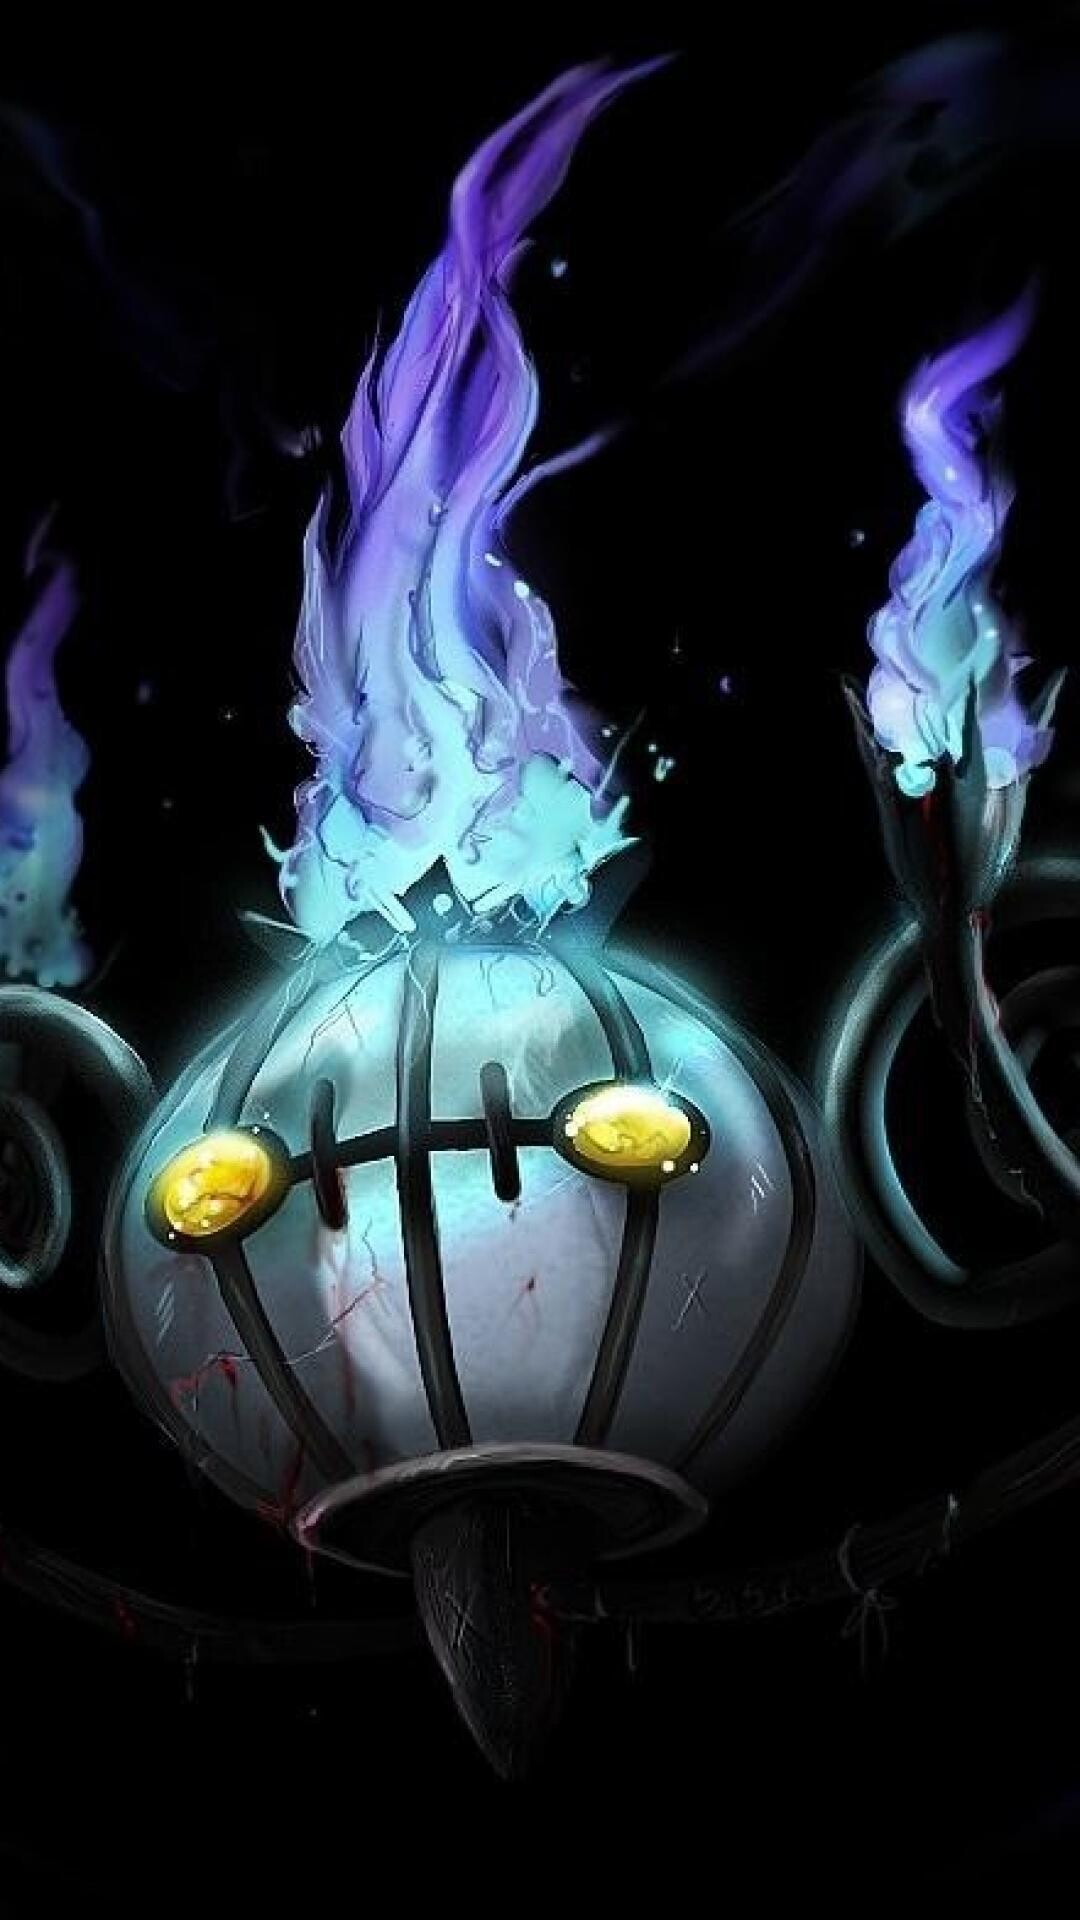 Ghost Pokemon: Chandelure, evolves from Lampent when exposed to a Dusk Stone. 1080x1920 Full HD Wallpaper.